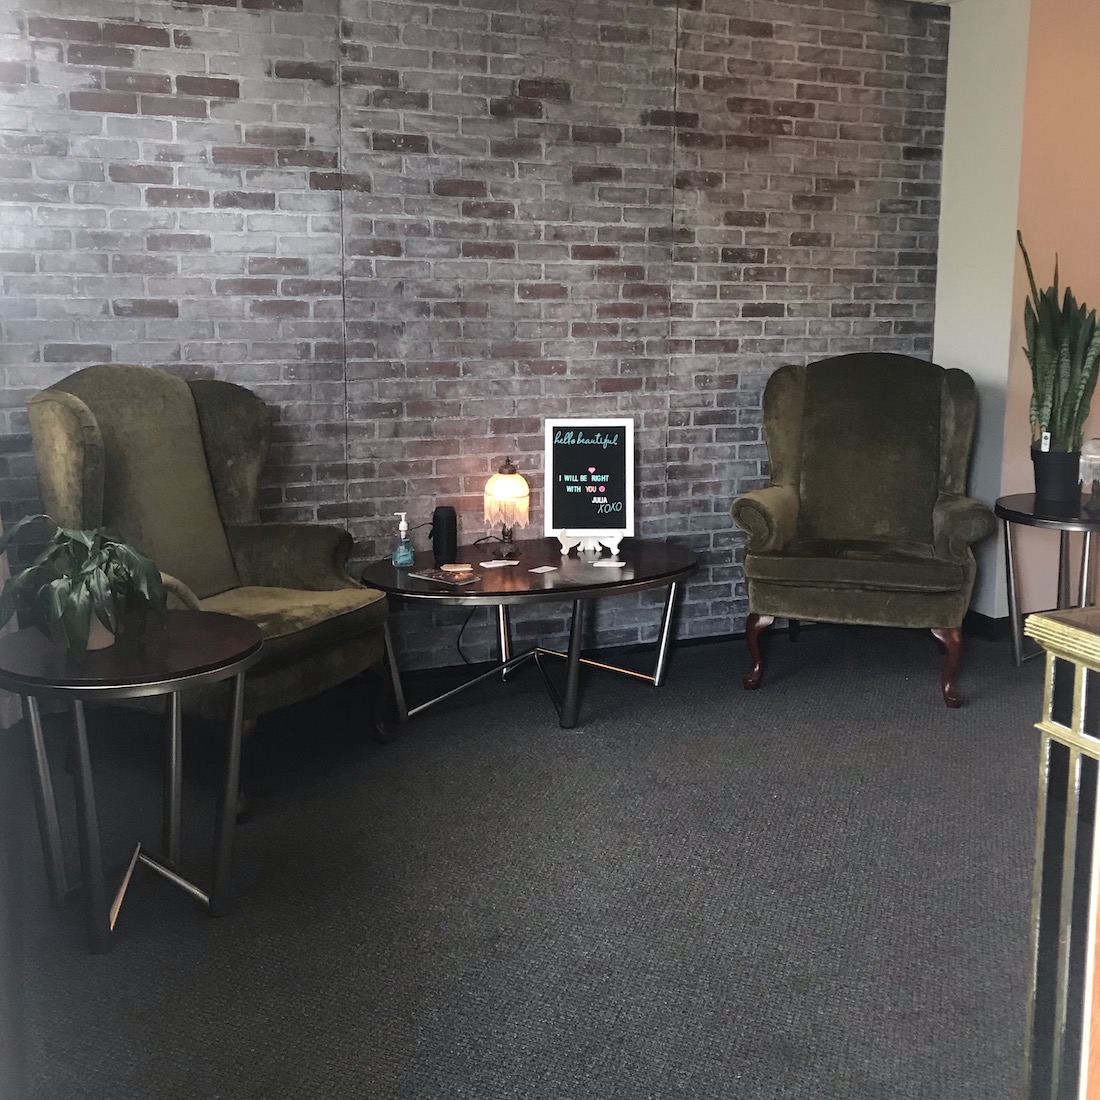 Prime Microblading & Beauty Lounge Area